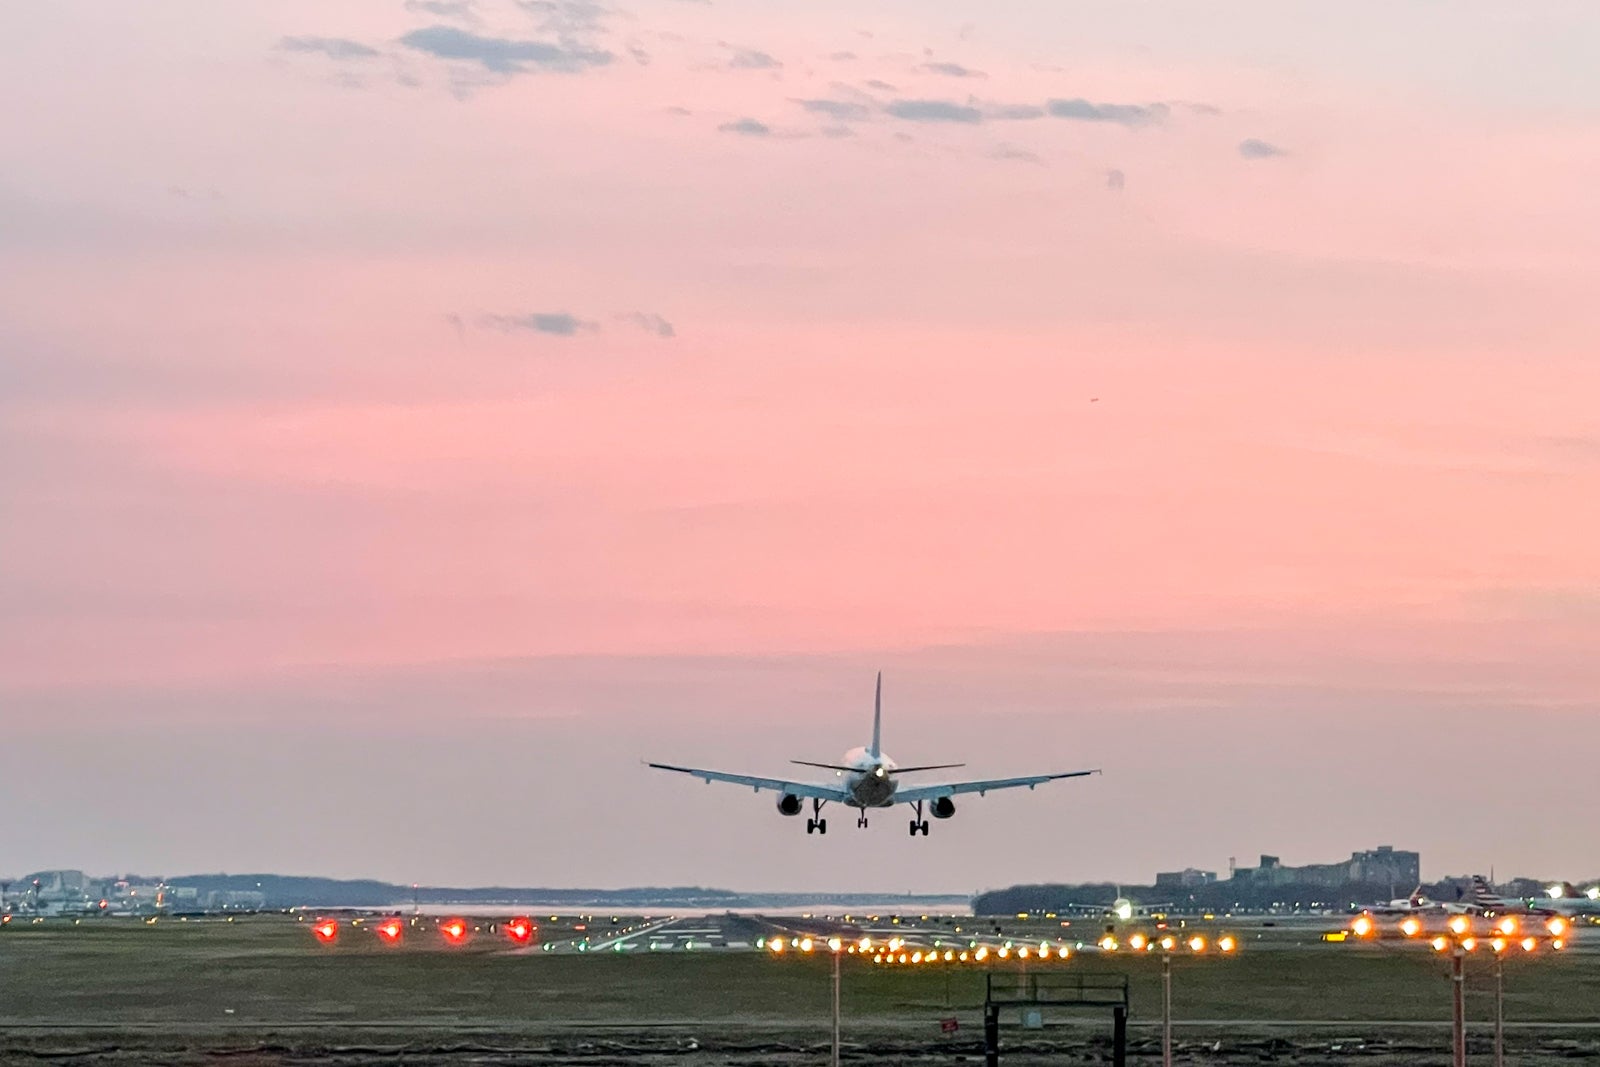 An airplane landing at DCA airport